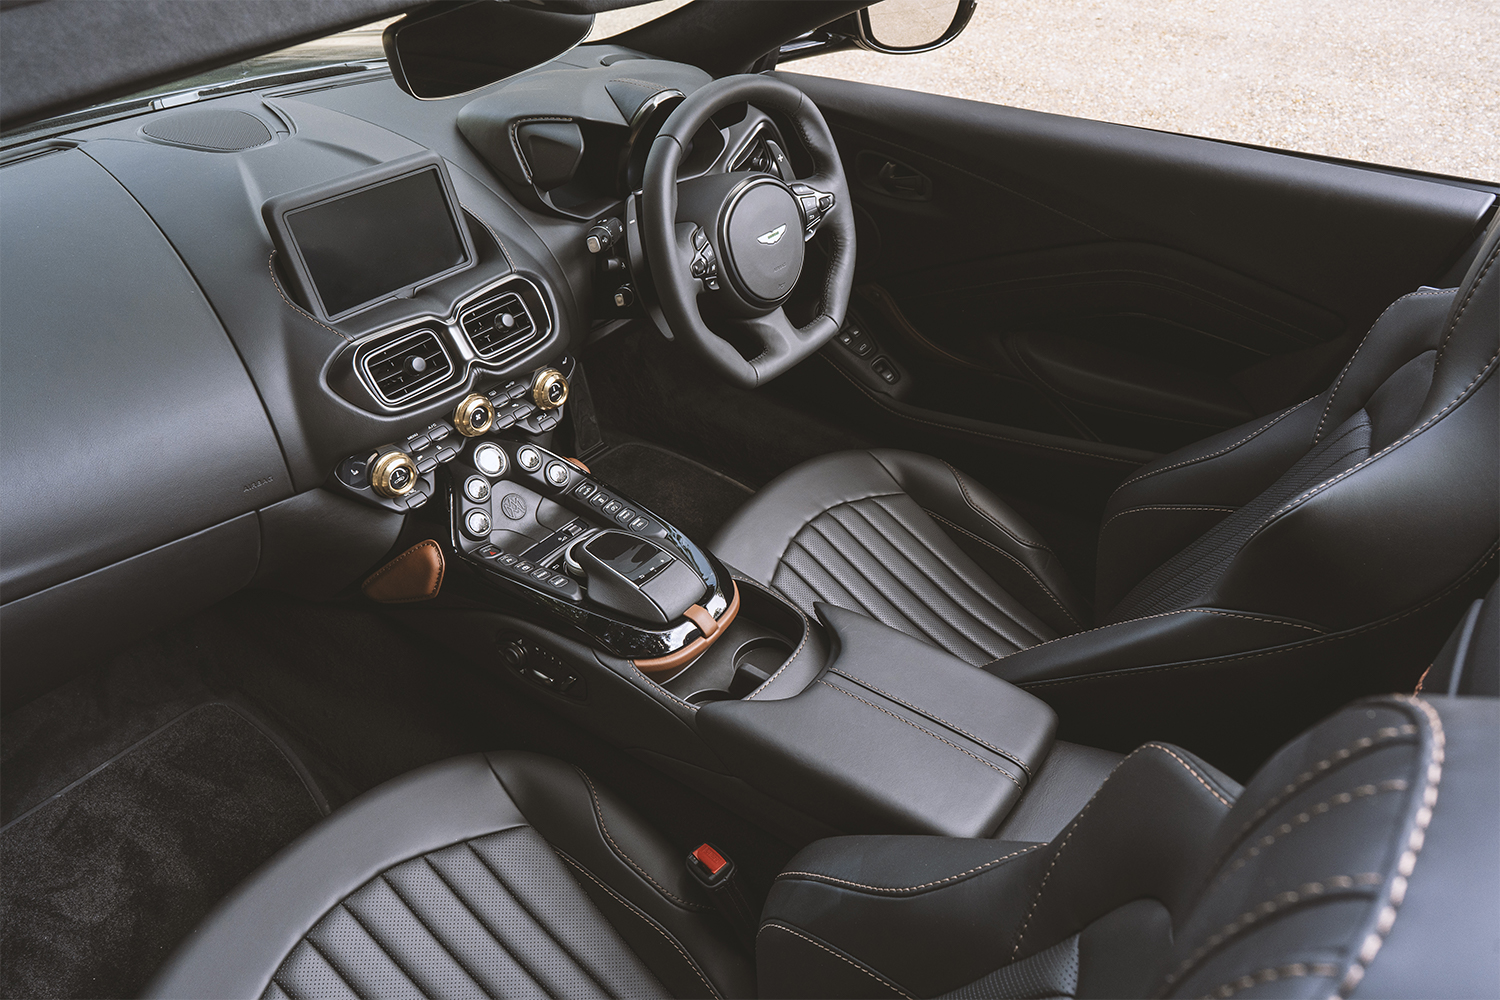 The interior of the new Aston Martin Vantage Roadster customized by Q by Aston Martin to pay homage to the A3 from 1921